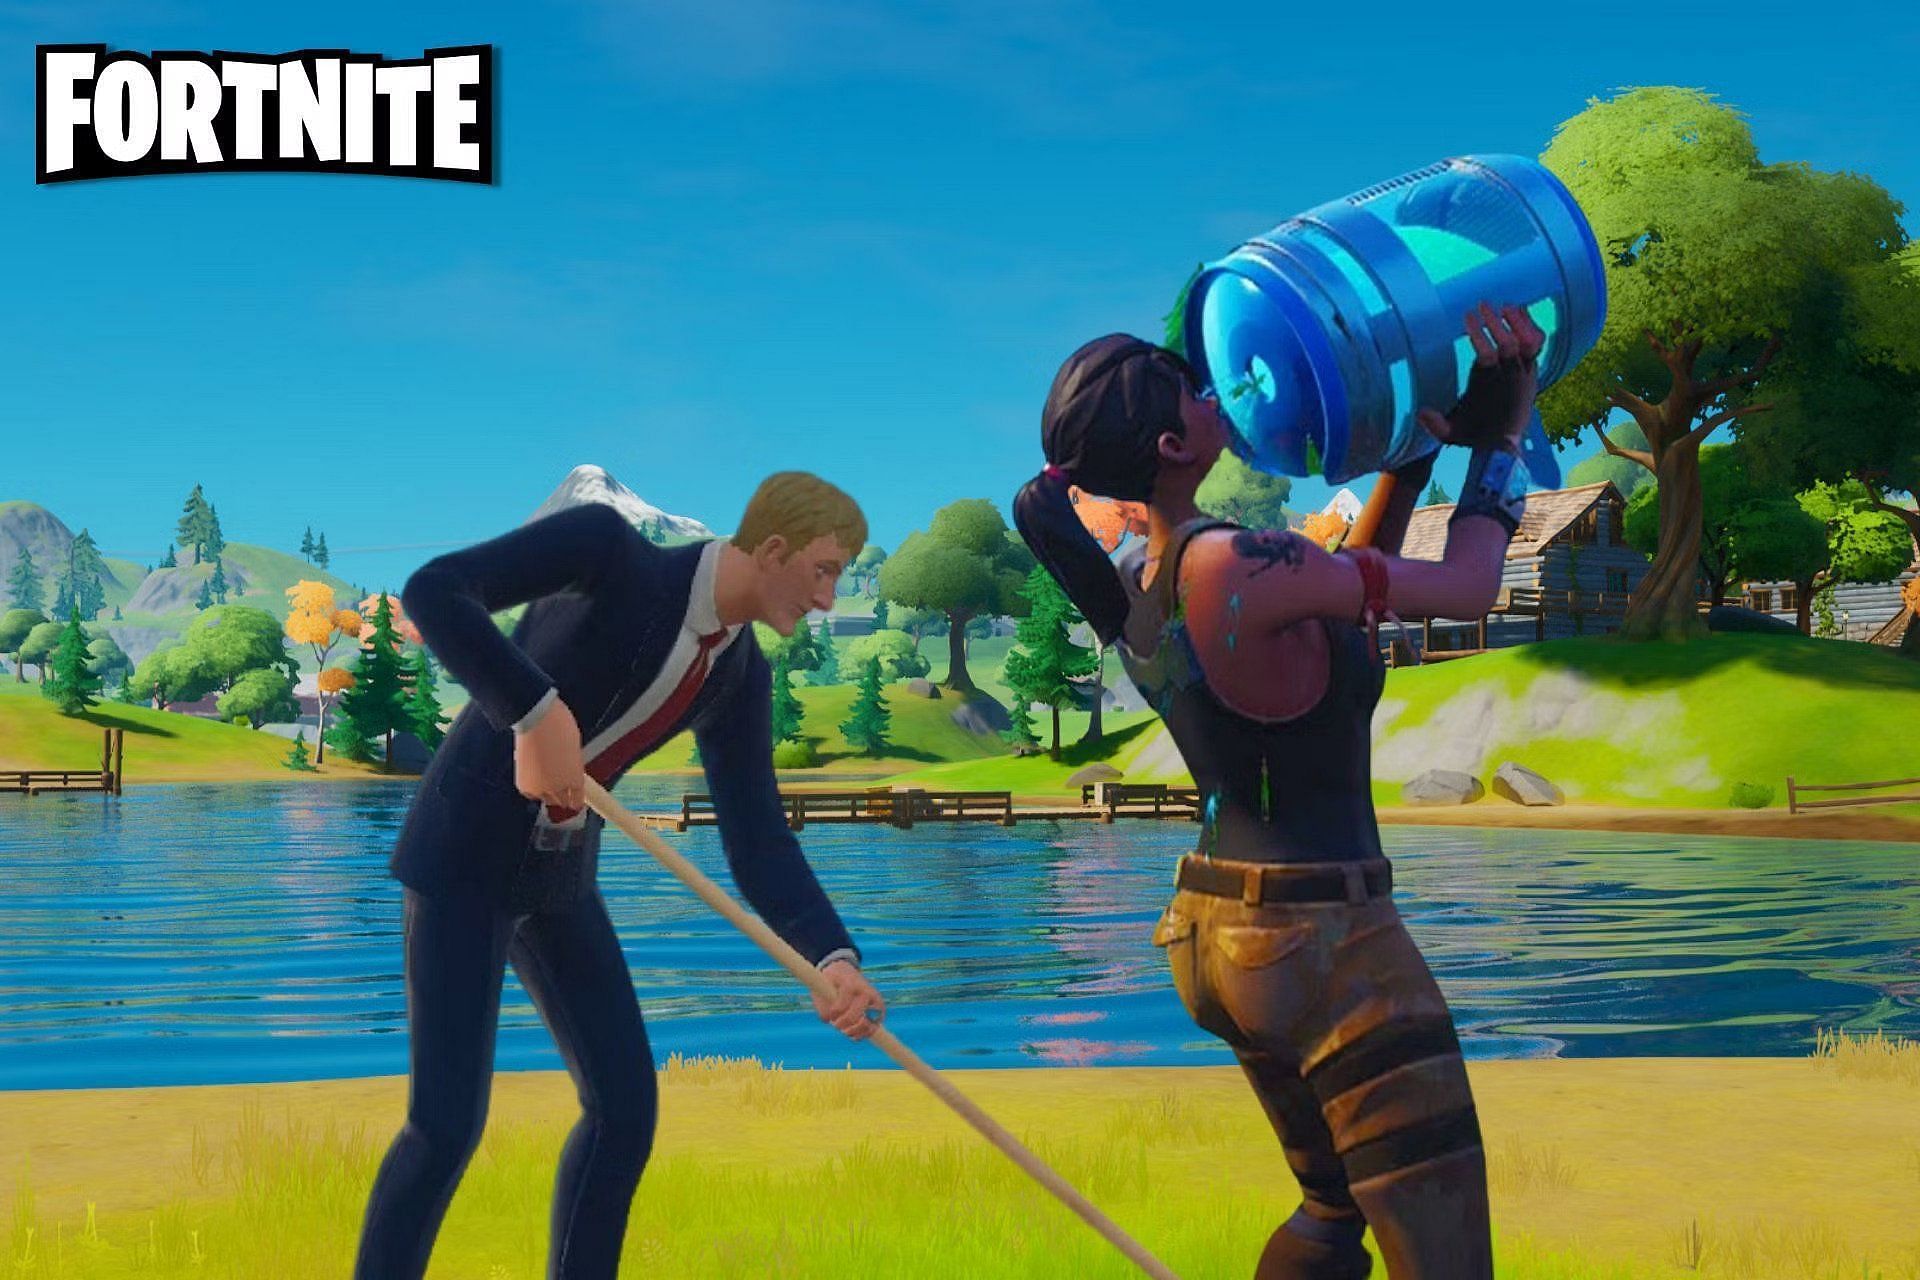 Chug Jug With You Fortnite song could soon become an Emote